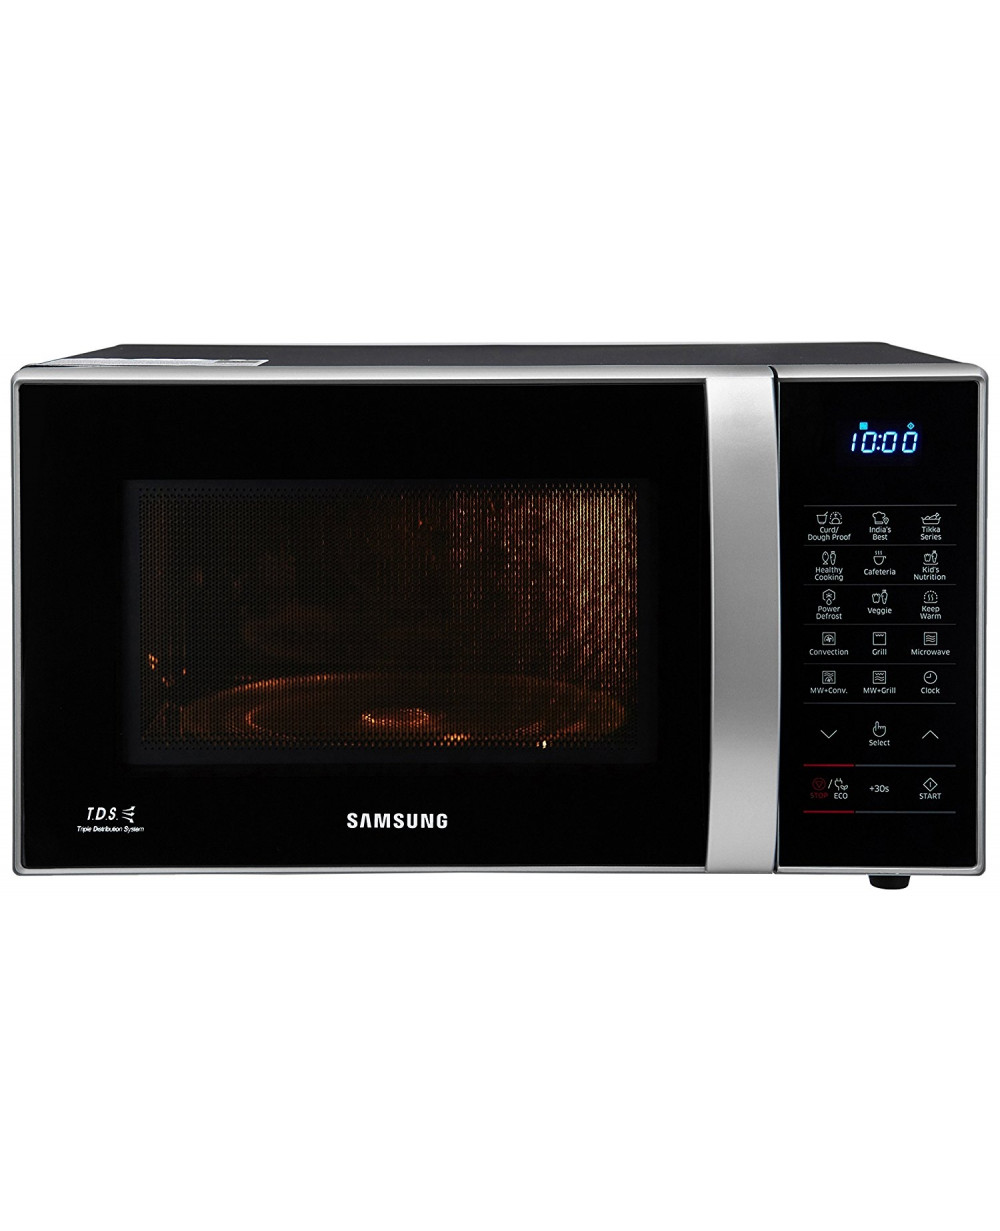 Samsung Microwave Oven Price In NepalBestMicrowave